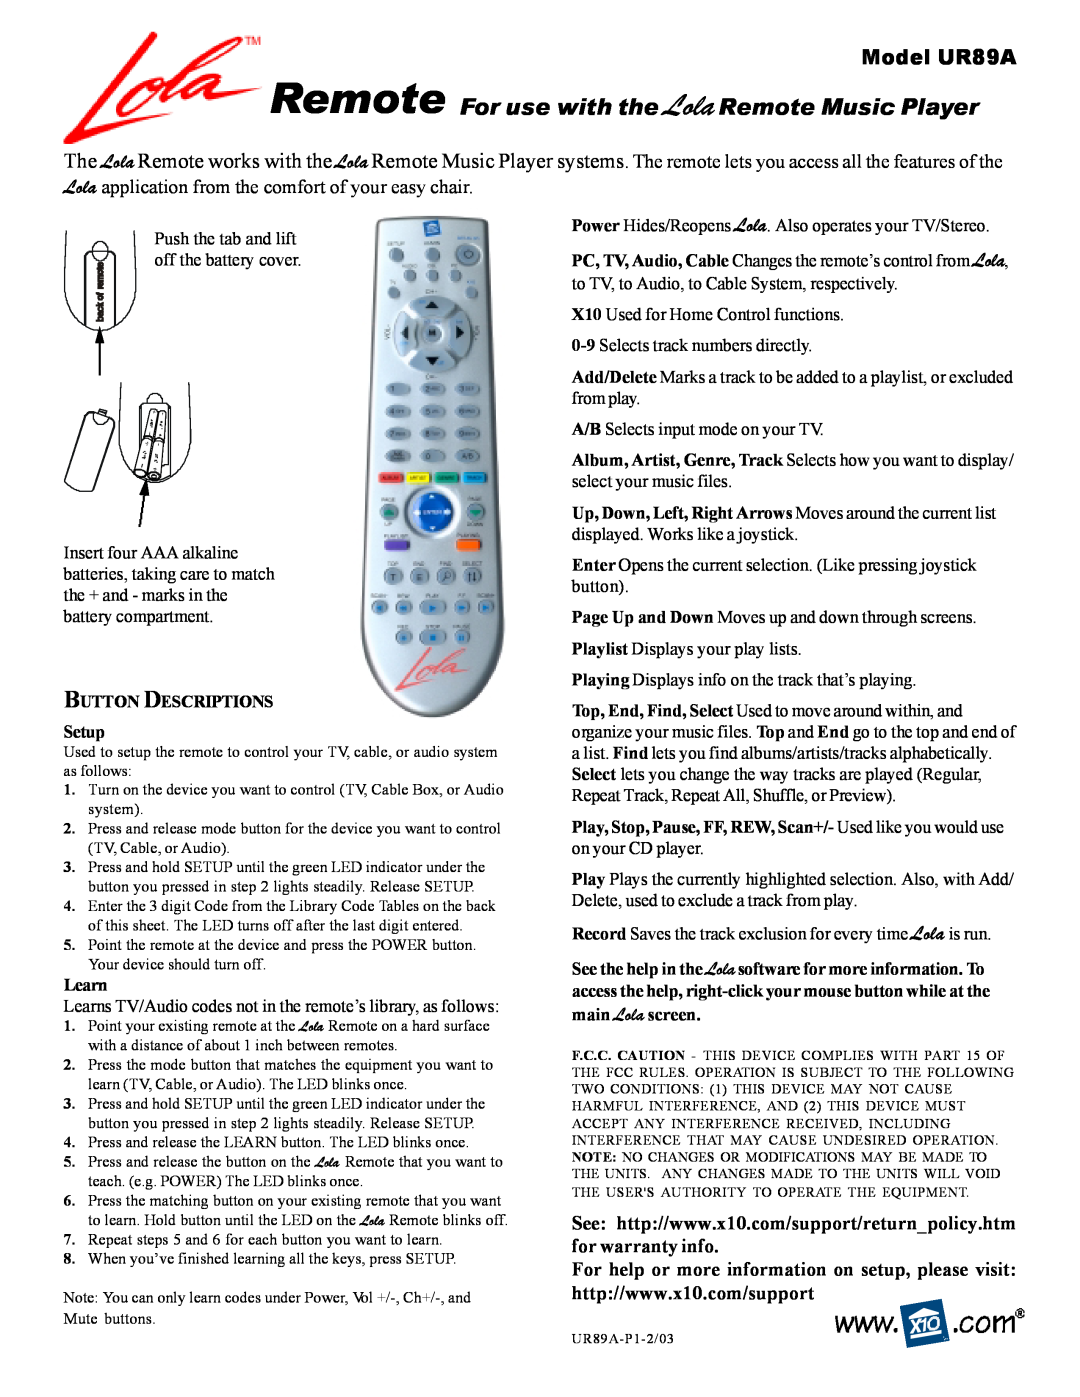 Lola Products manual Remote For use with the Lola Remote Music Player, Model UR89A, BUTTON DESCRIPTIONS Setup, Learn 